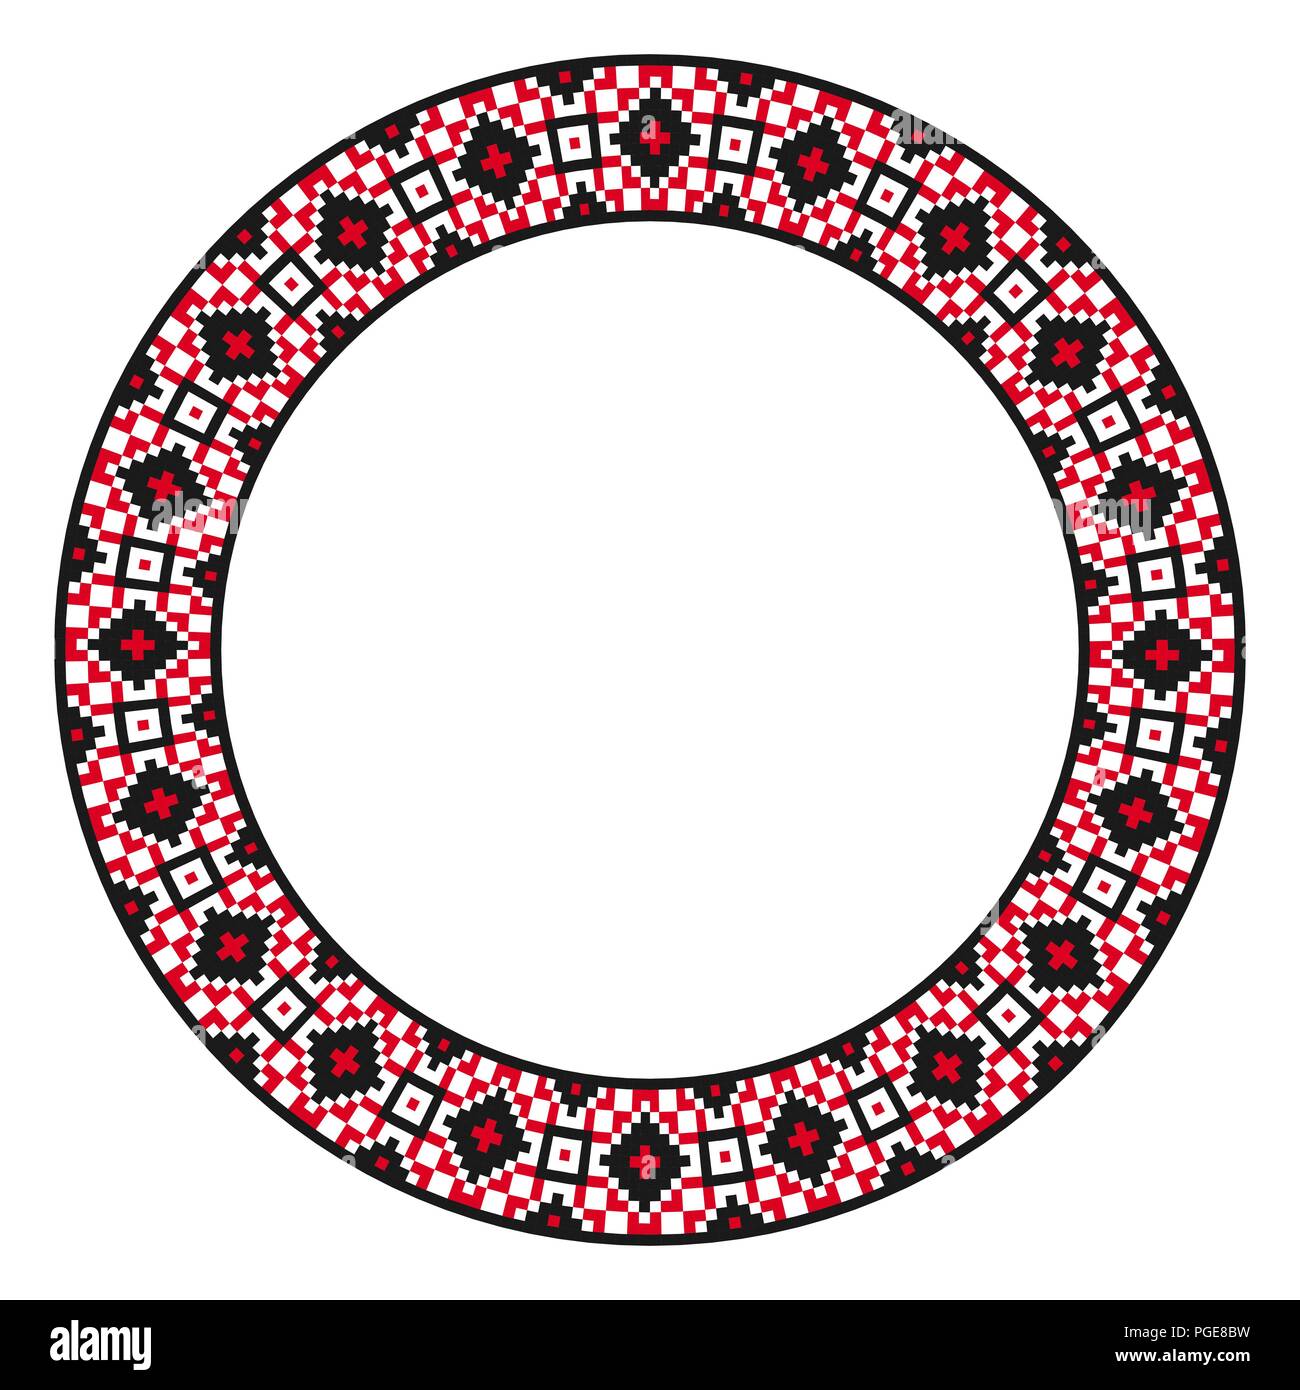 Traditional round embroidery. Vector illustration of ethnic round geometric embroidered pattern for your design Stock Vector